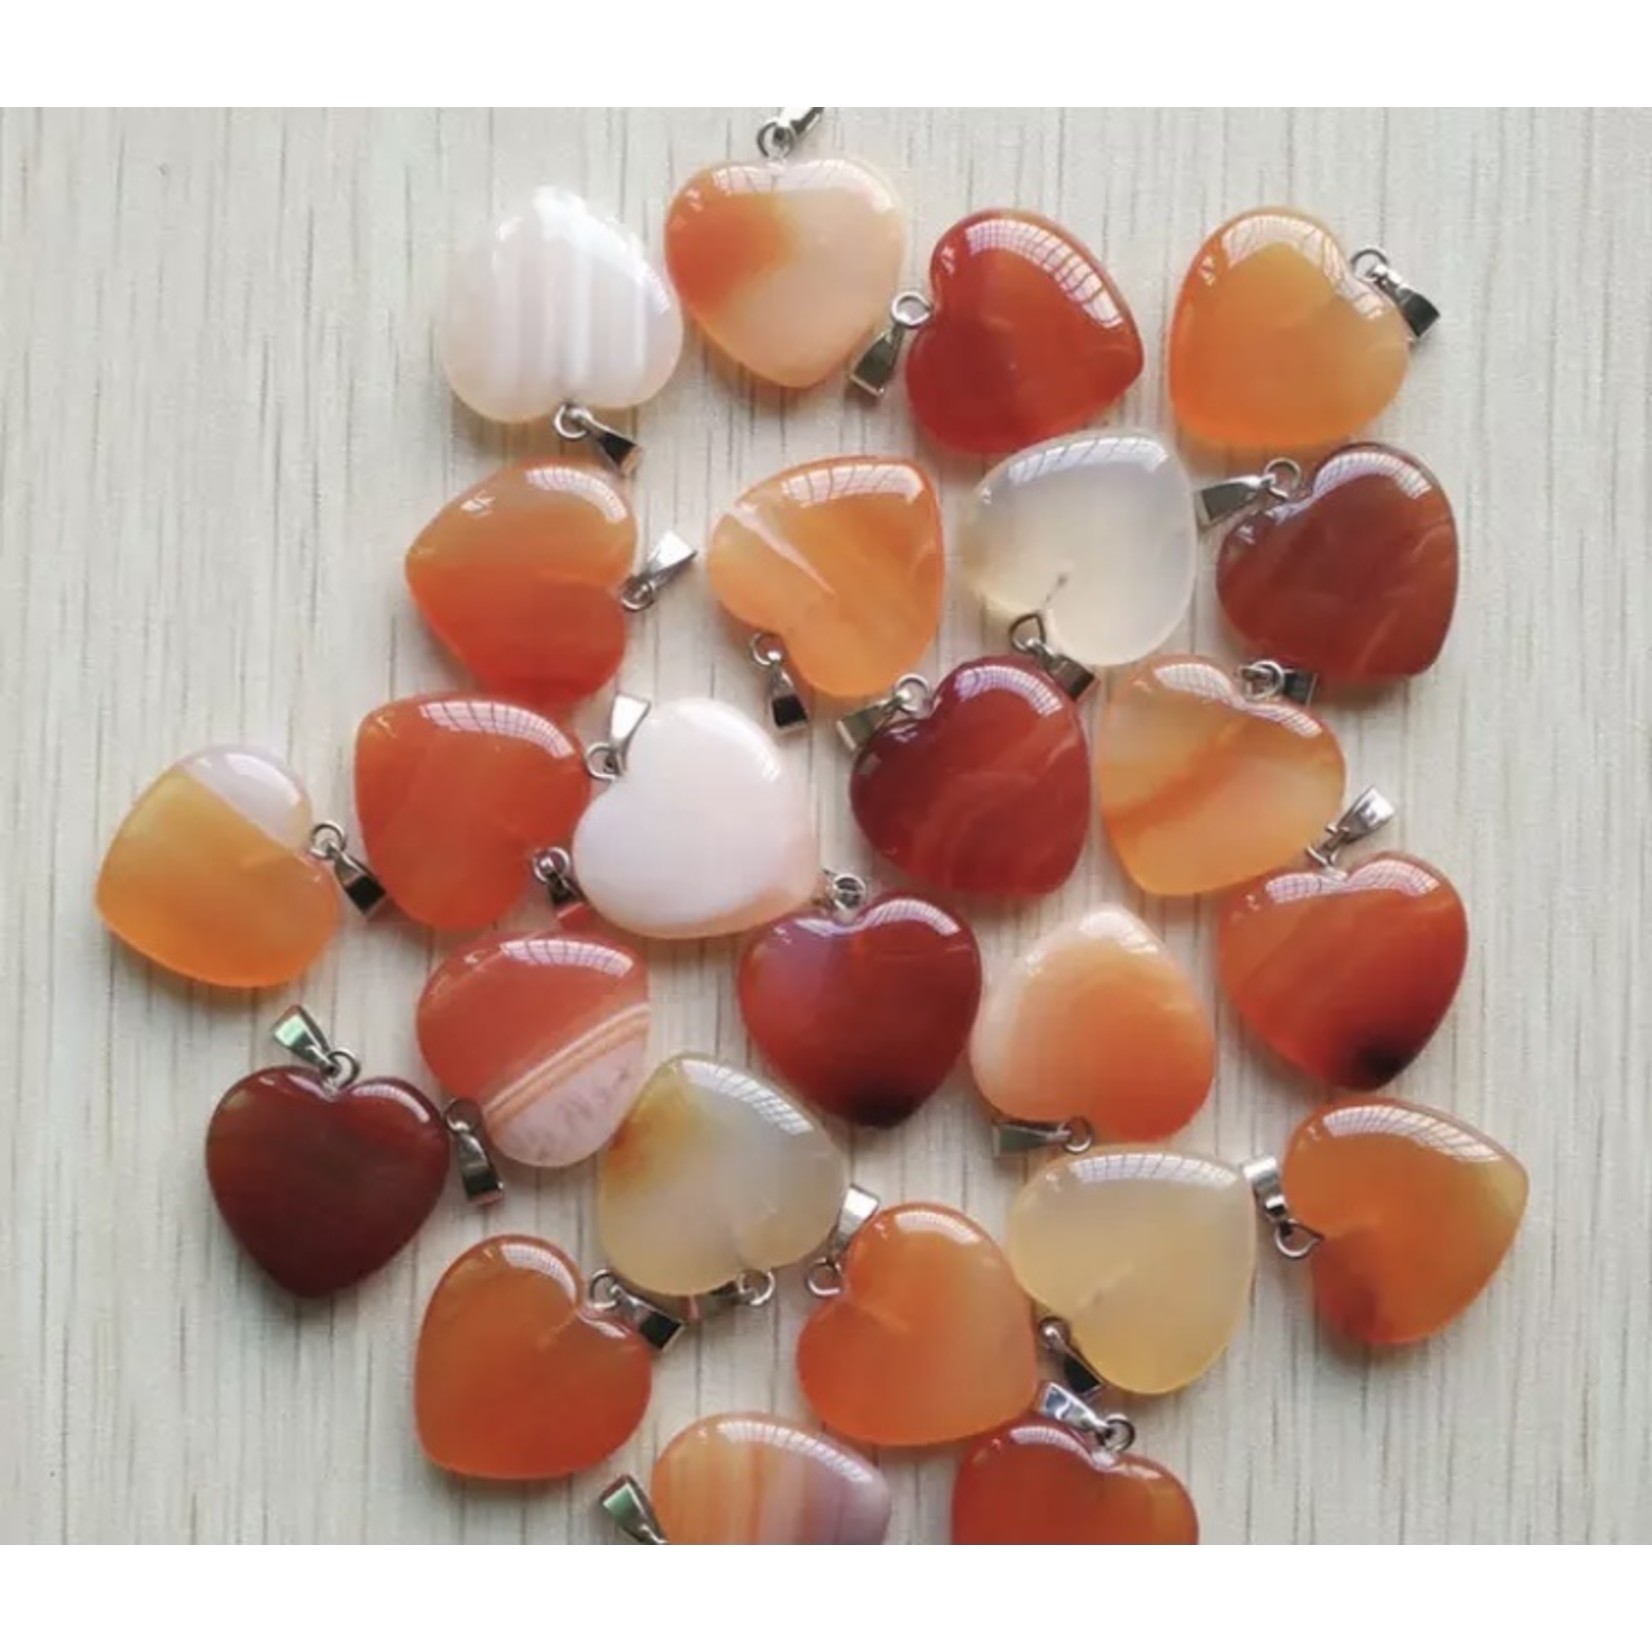 stripped agate pendant -20mm